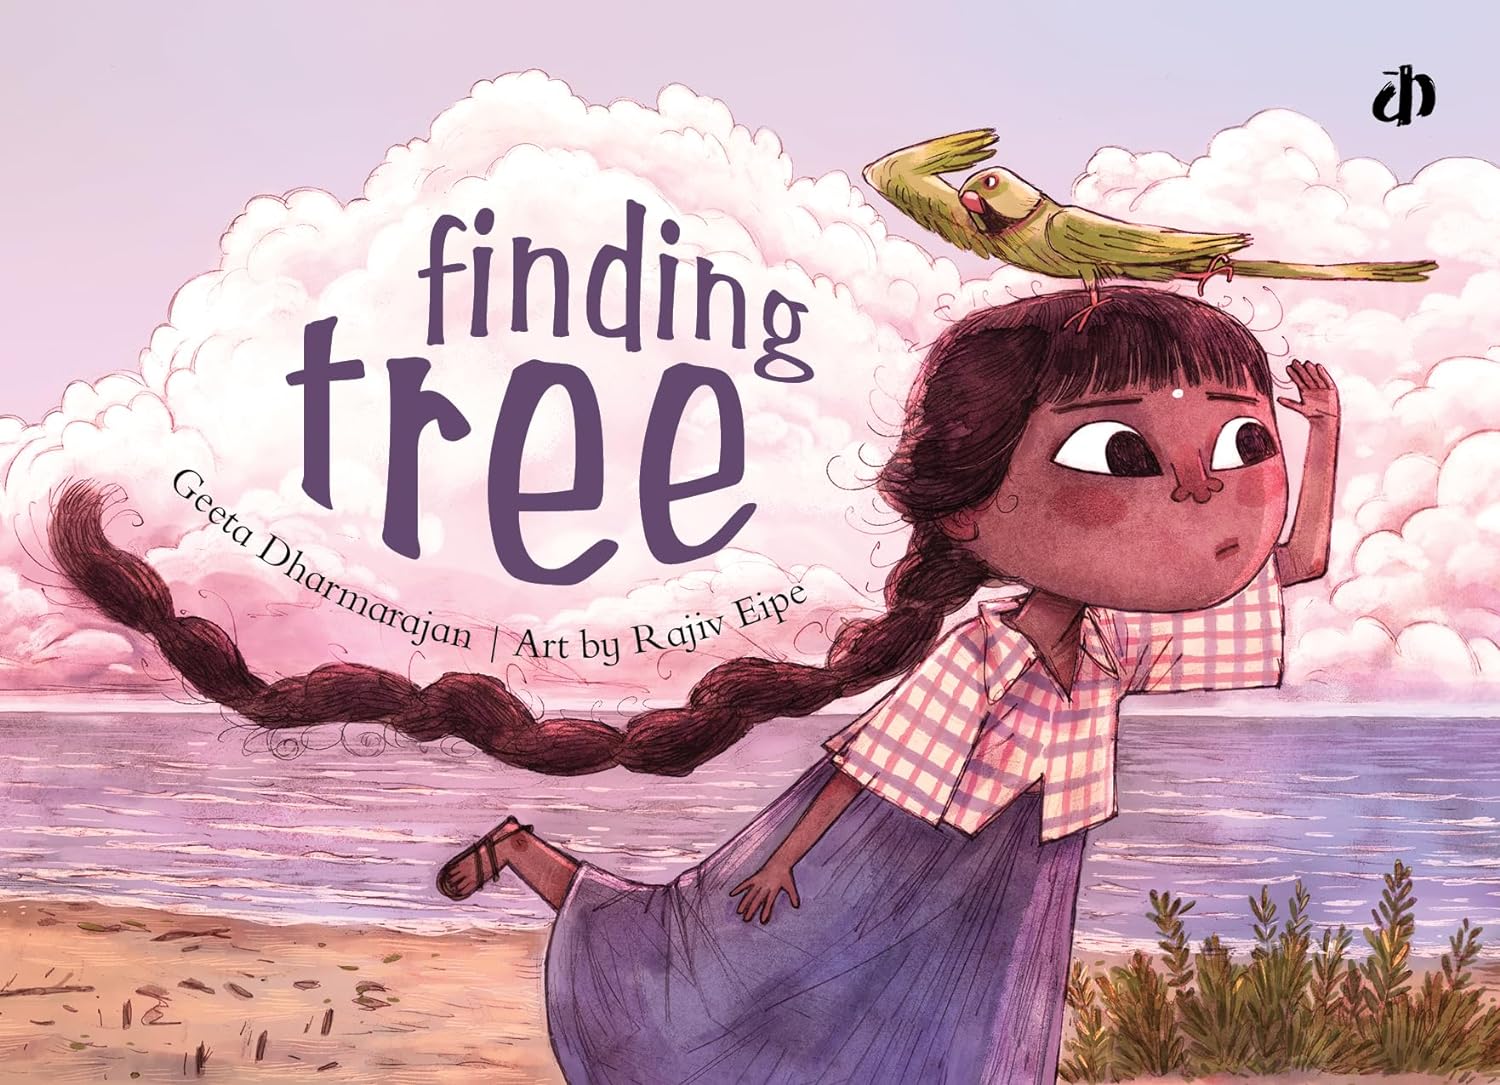 You are currently viewing Finding Tree by Geeta Dharmarajan 